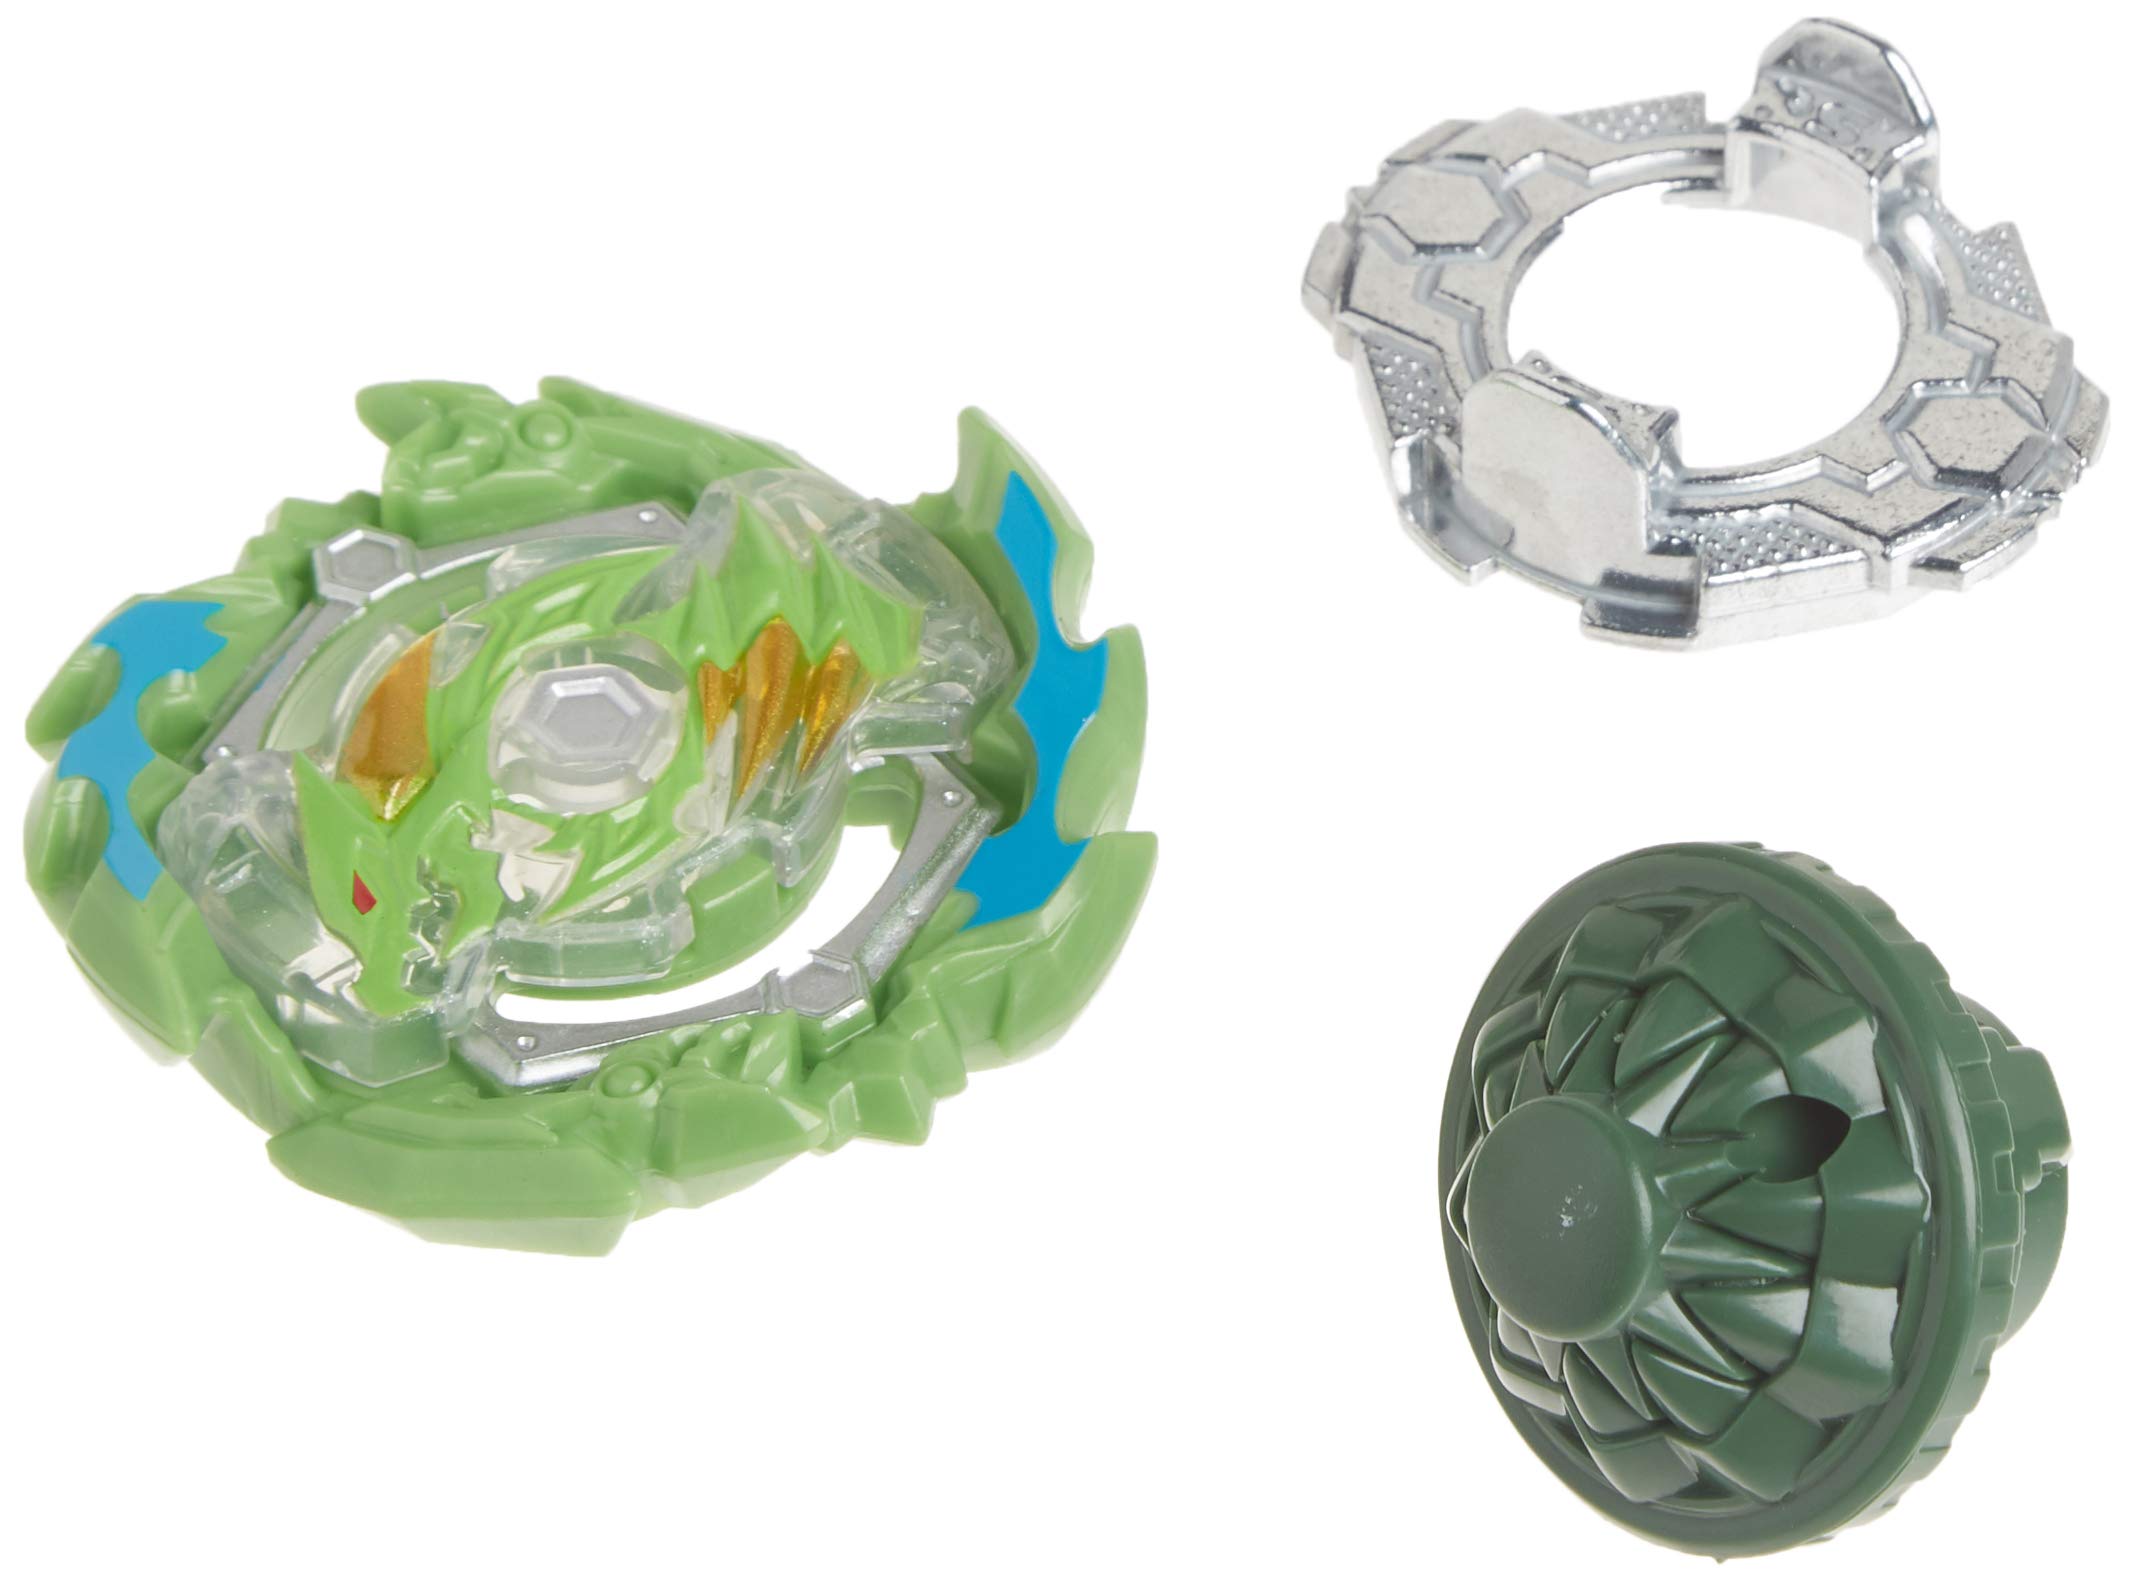 BEYBLADE Burst Rise Hypersphere Battle Heroes 3-Pack - Ace Dragon D5, Rudr R5, Viper Hydrax H5 Battling Game Tops, Toys Ages 8 and Up (Amazon Exclusive)